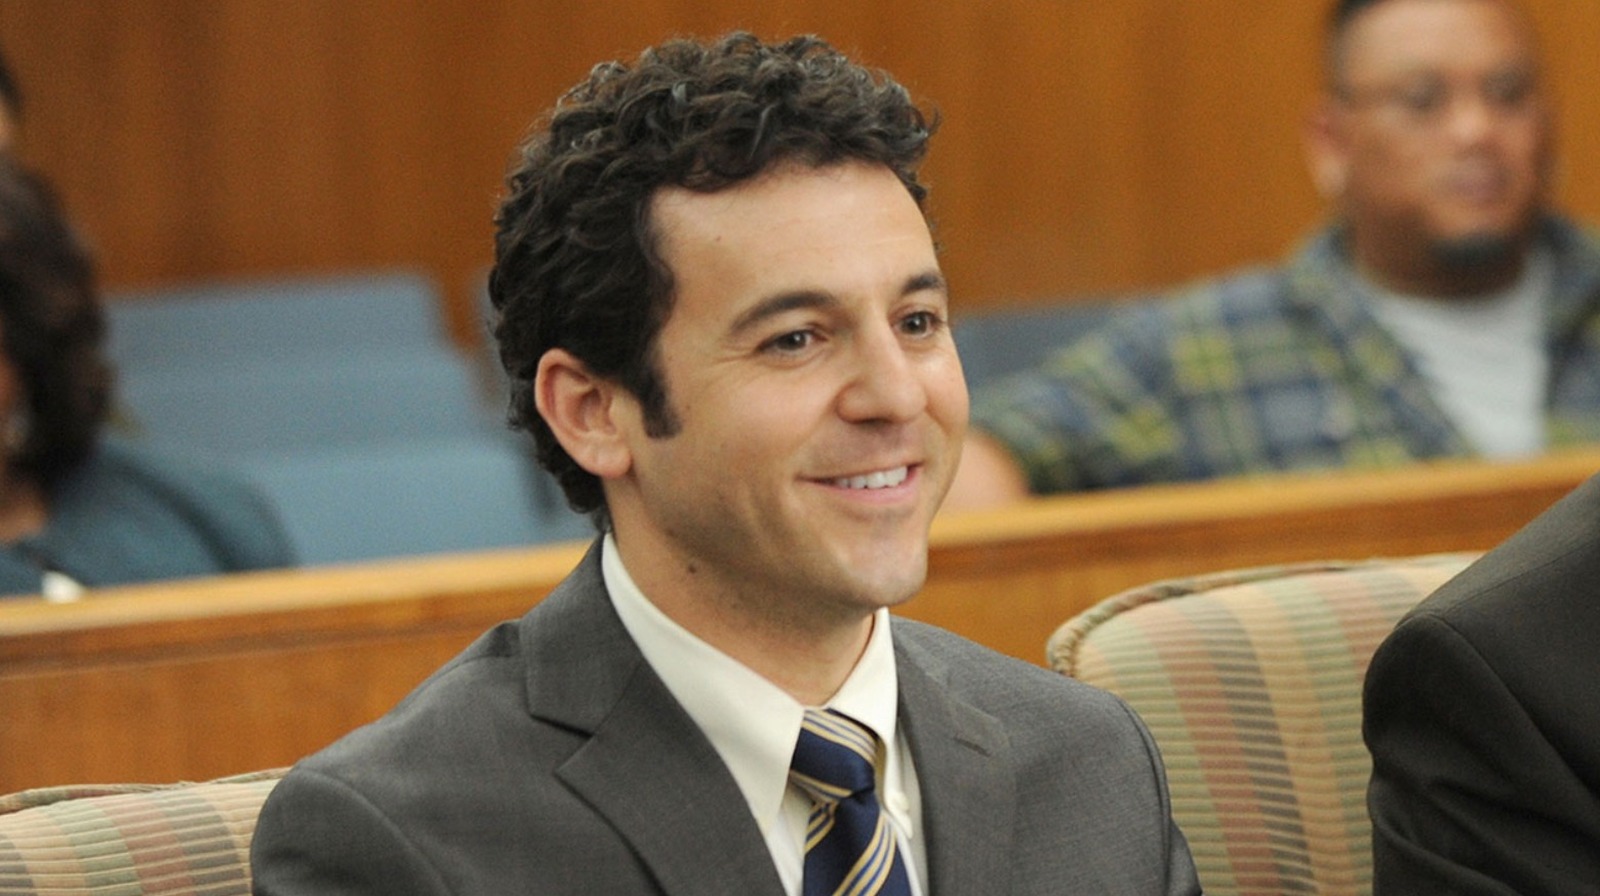 Fred Savage Fired From The Wonder Years After Investigation Into Inappropriate Conduct - /Film